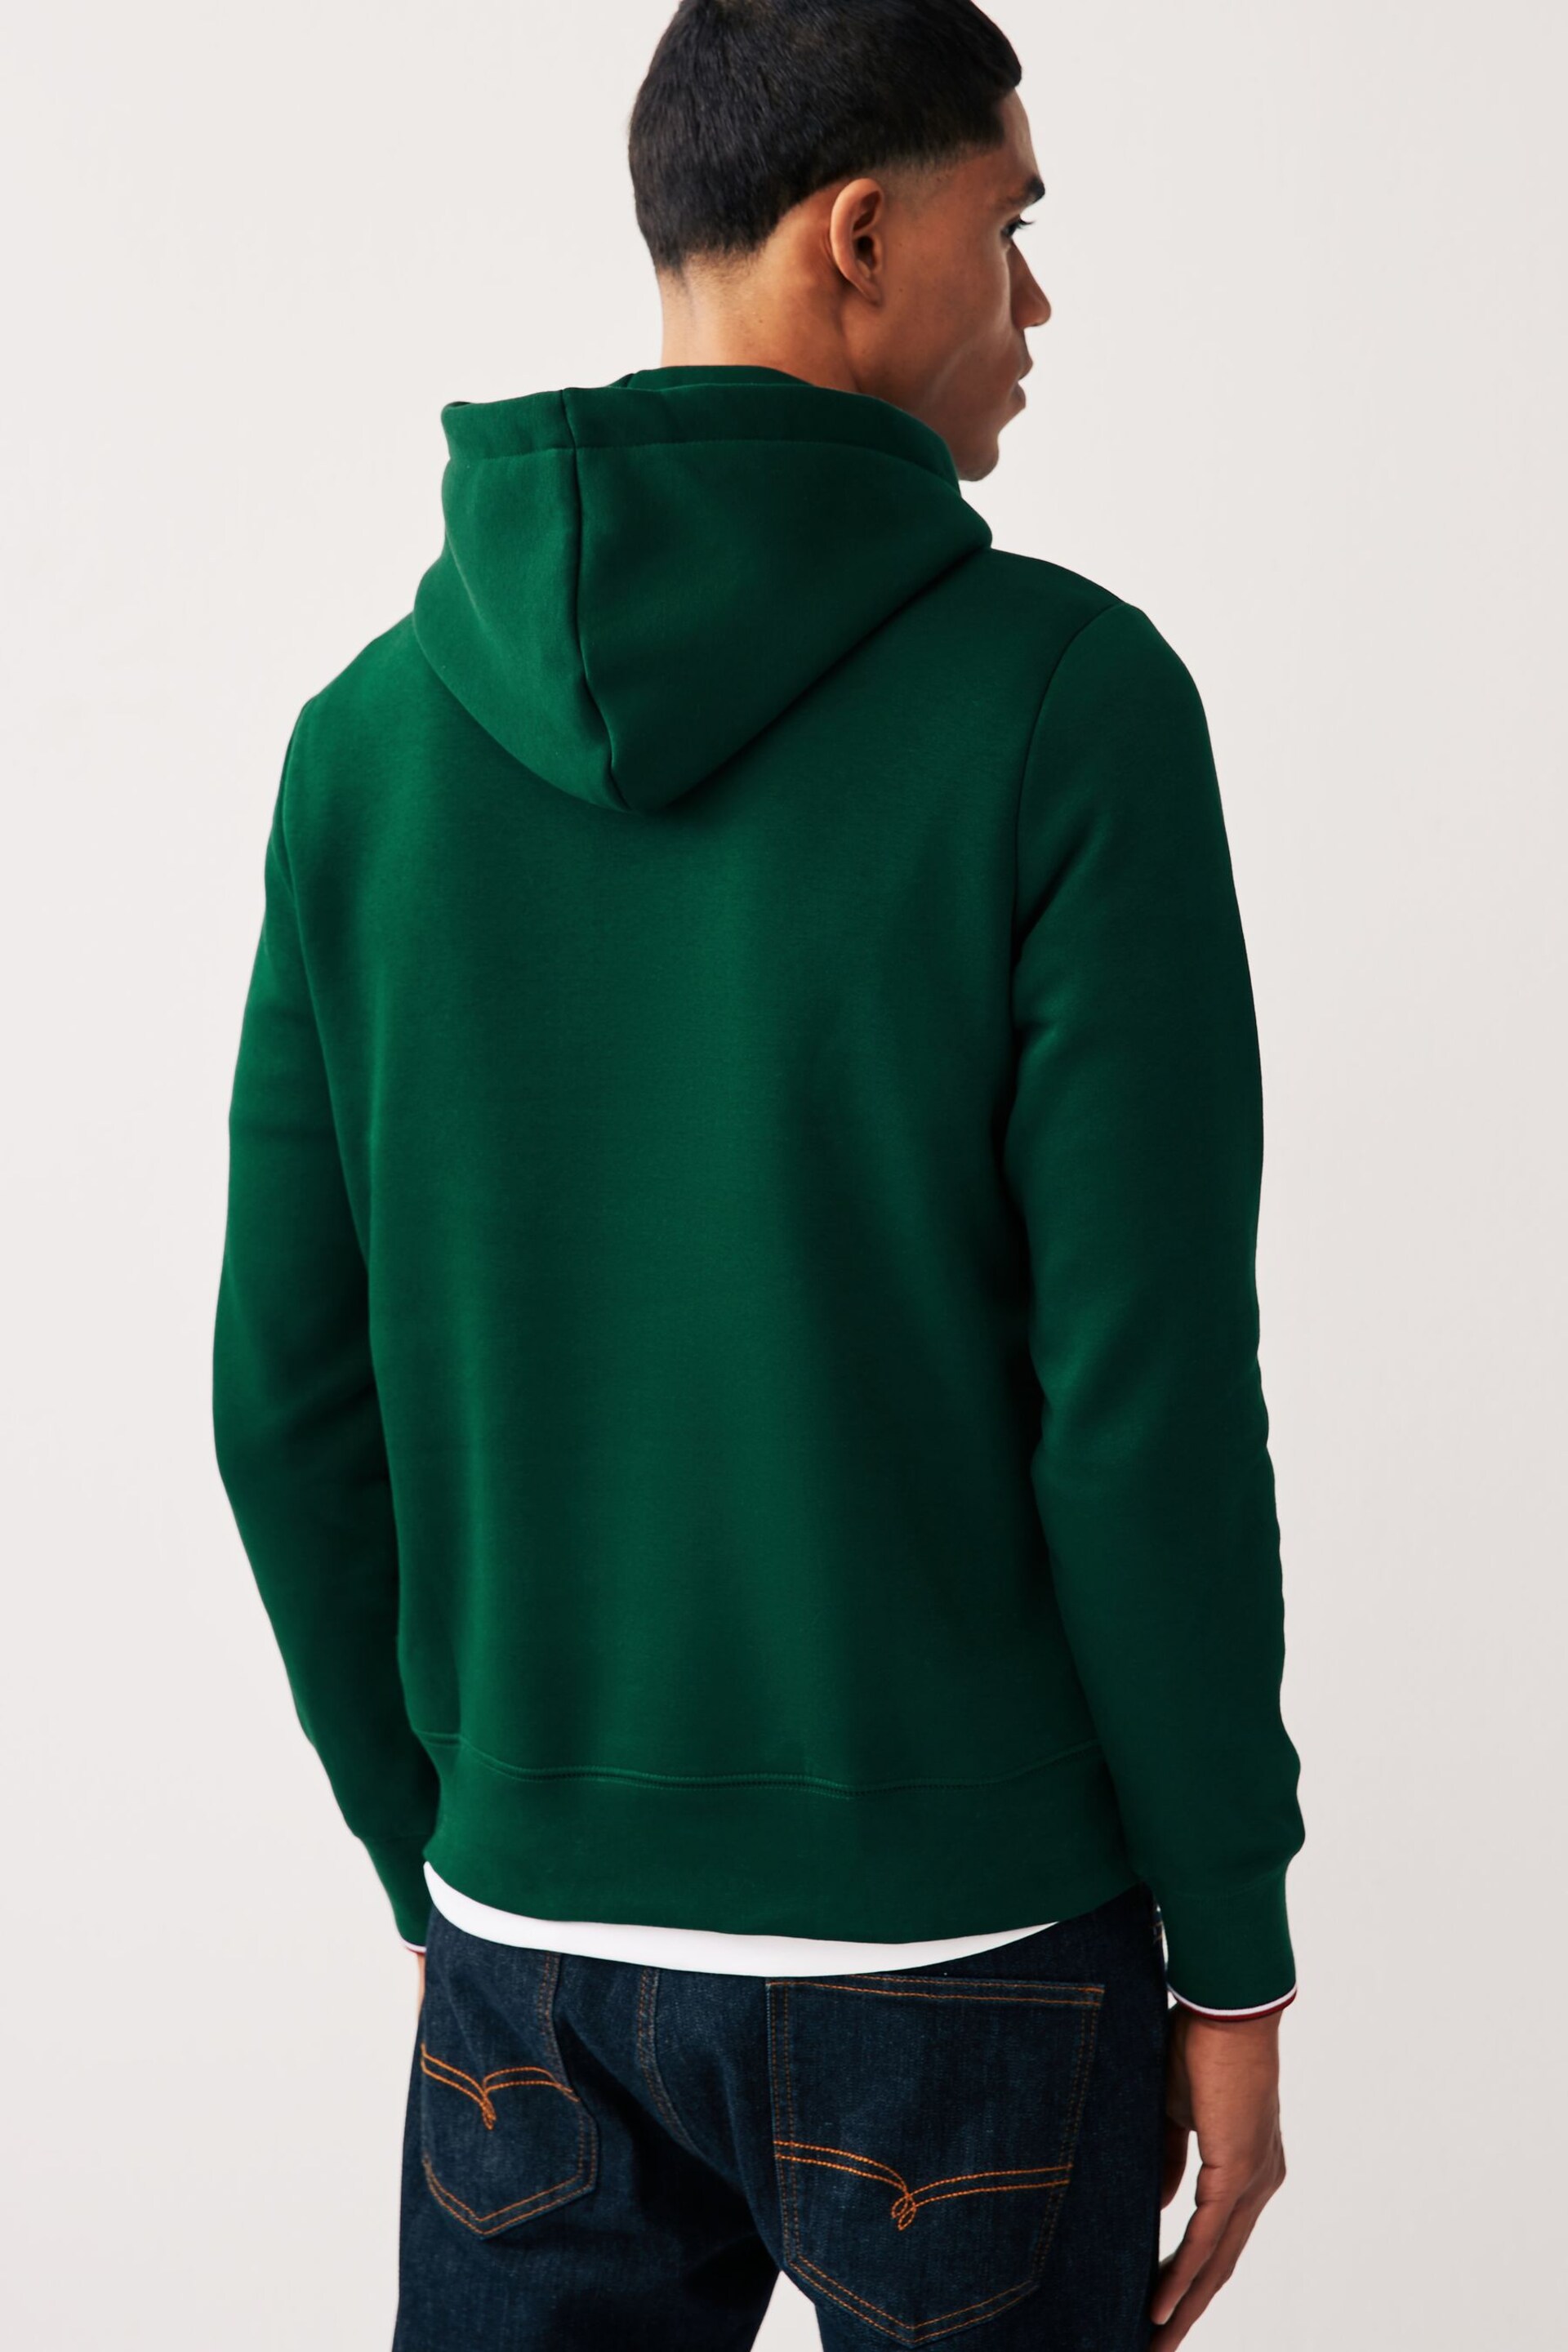 Tommy Hilfiger Green Logo Tipped Hoodie - Image 2 of 4